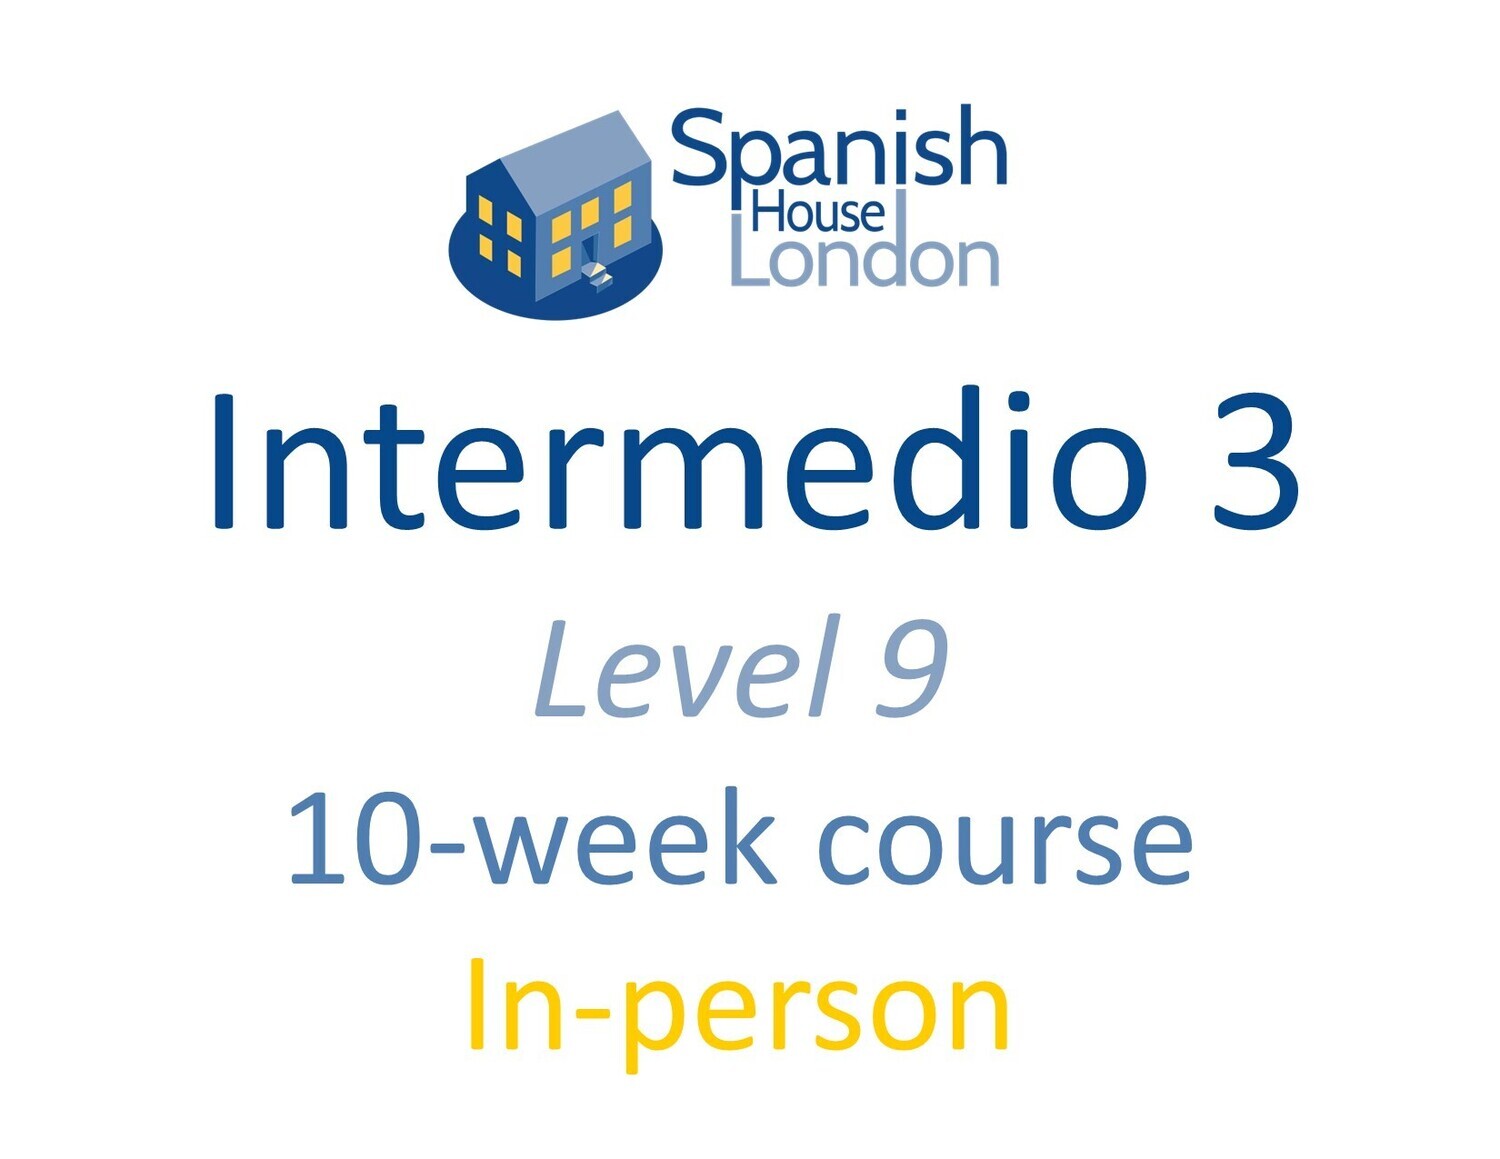 Intermedio 3 Course starting on 9th February at 7.30pm in Euston / King's Cross